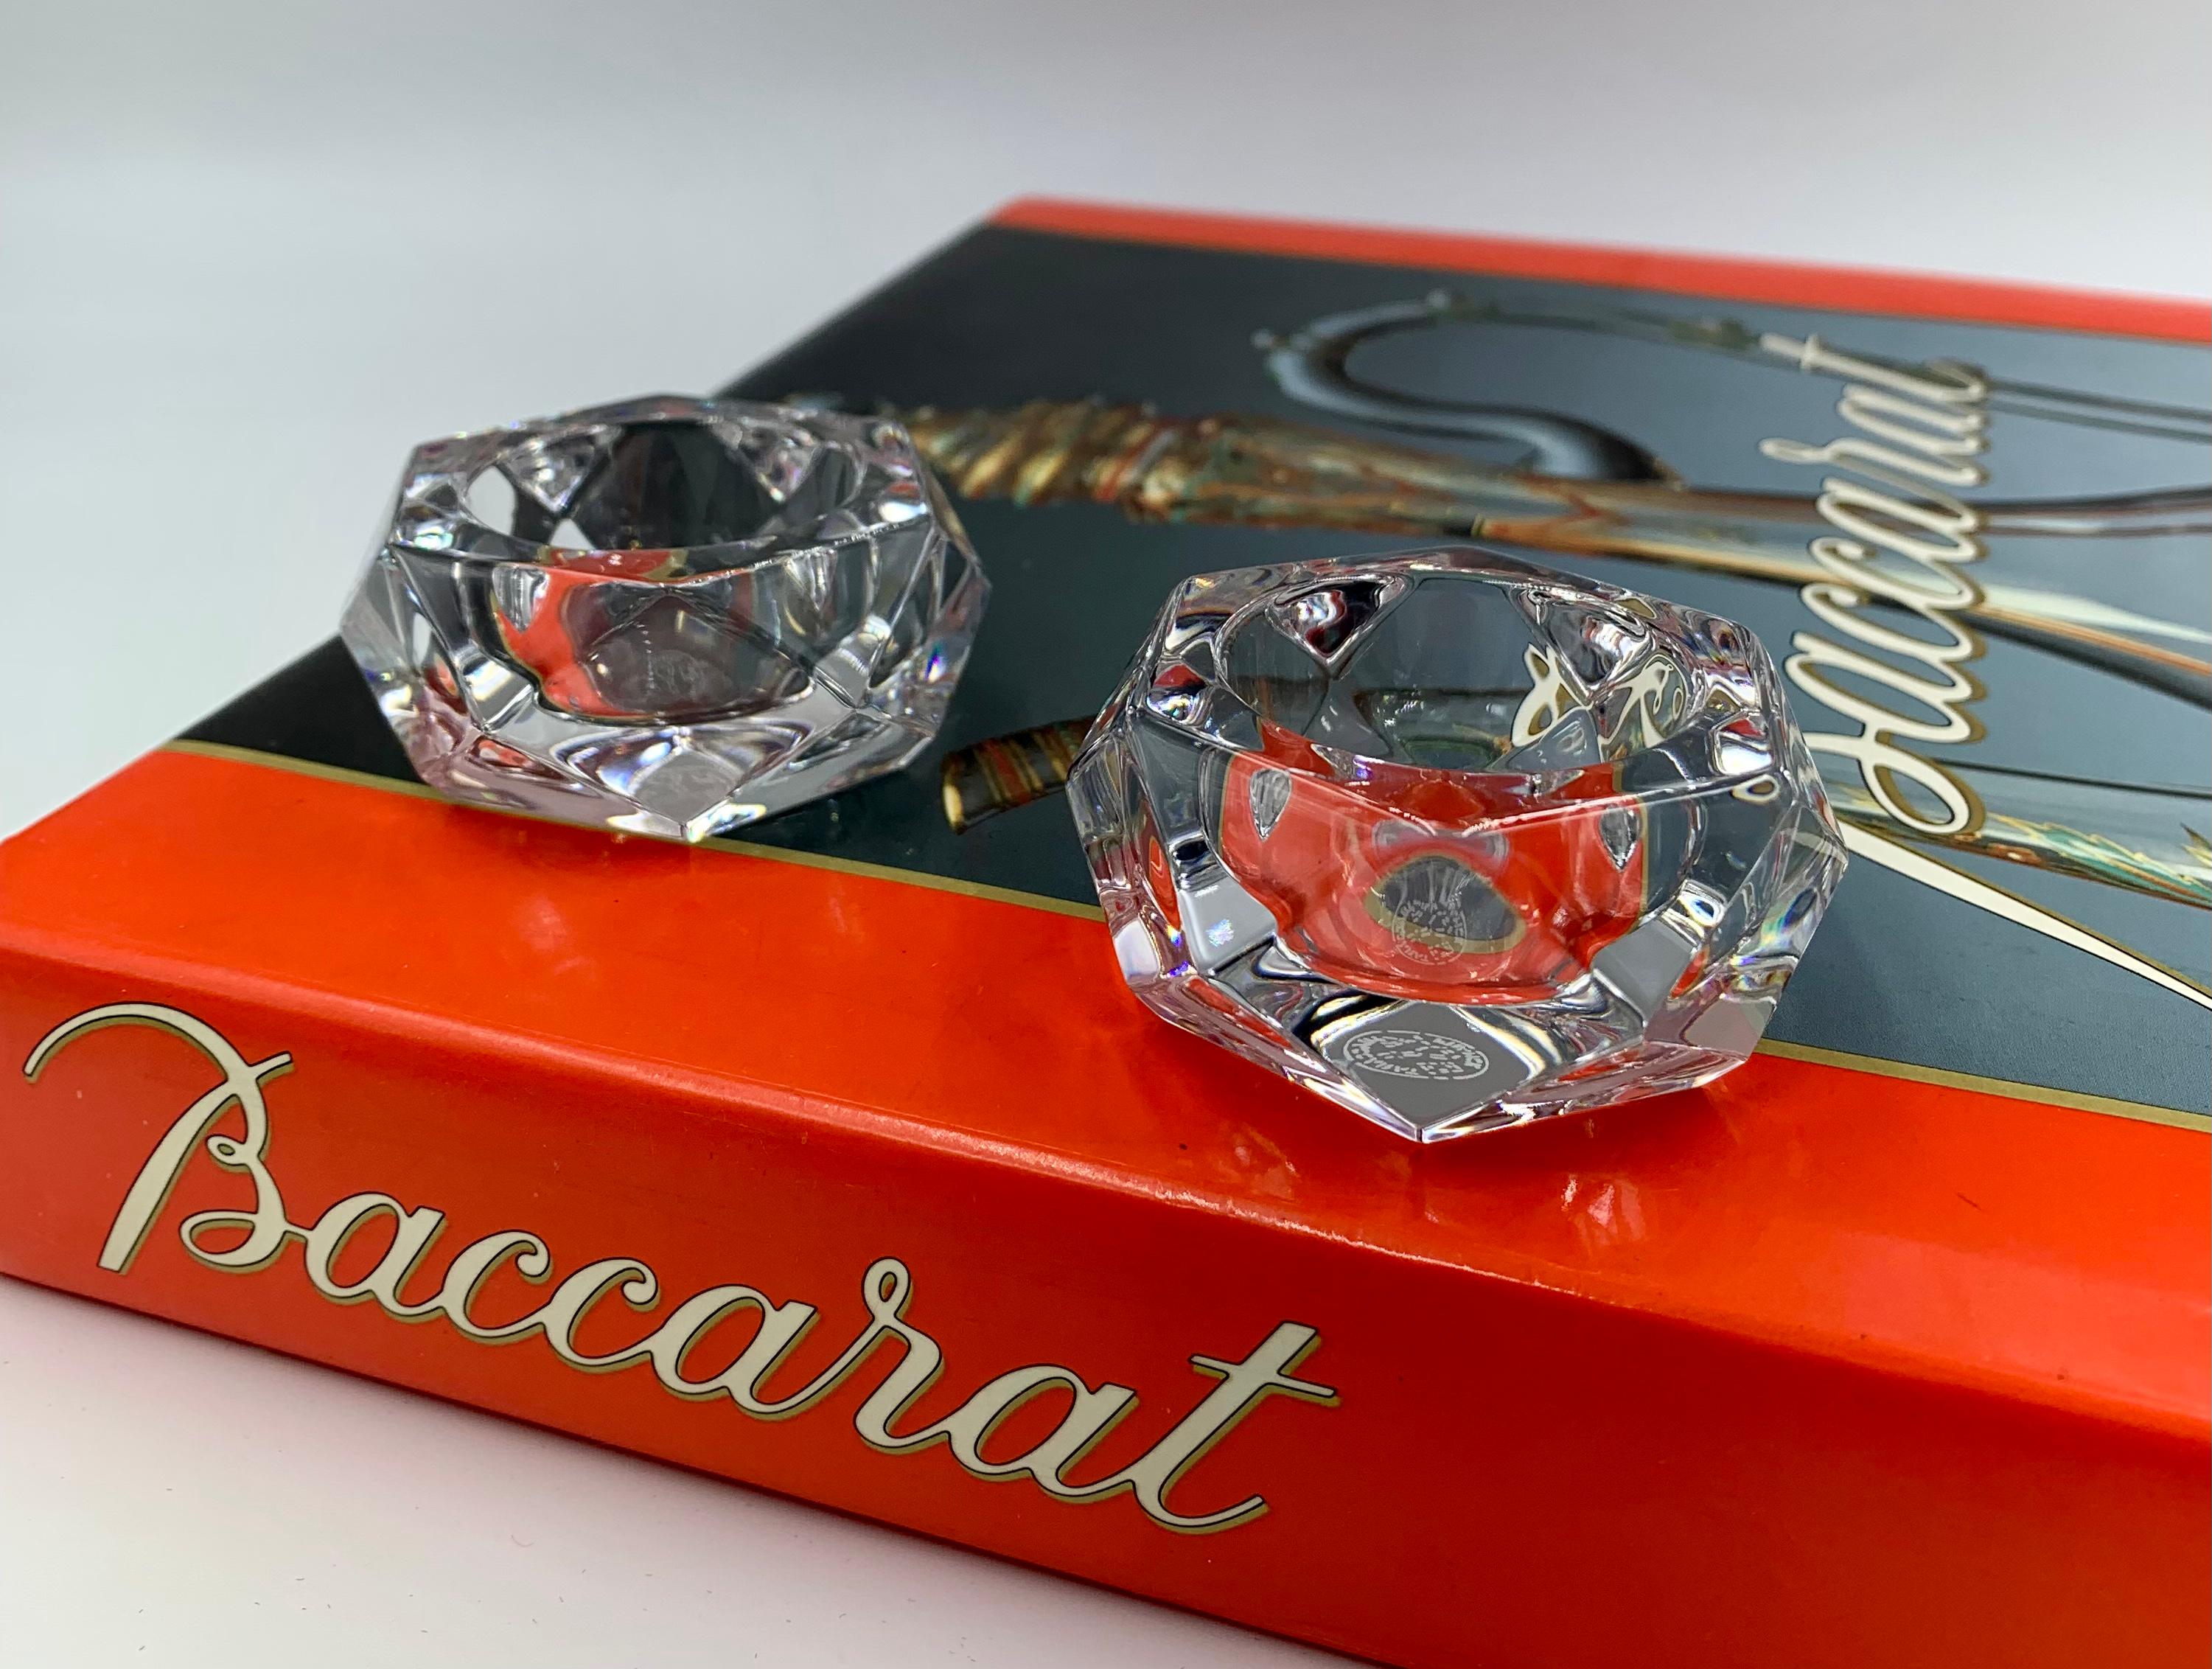 Fine pair of Baccarat crystal salt cellars in excellent condition with original box. The sides are facet cut in rhombus and triangular shapes, the top with a circular space for the salt. Signed on the bases with the circular Baccarat